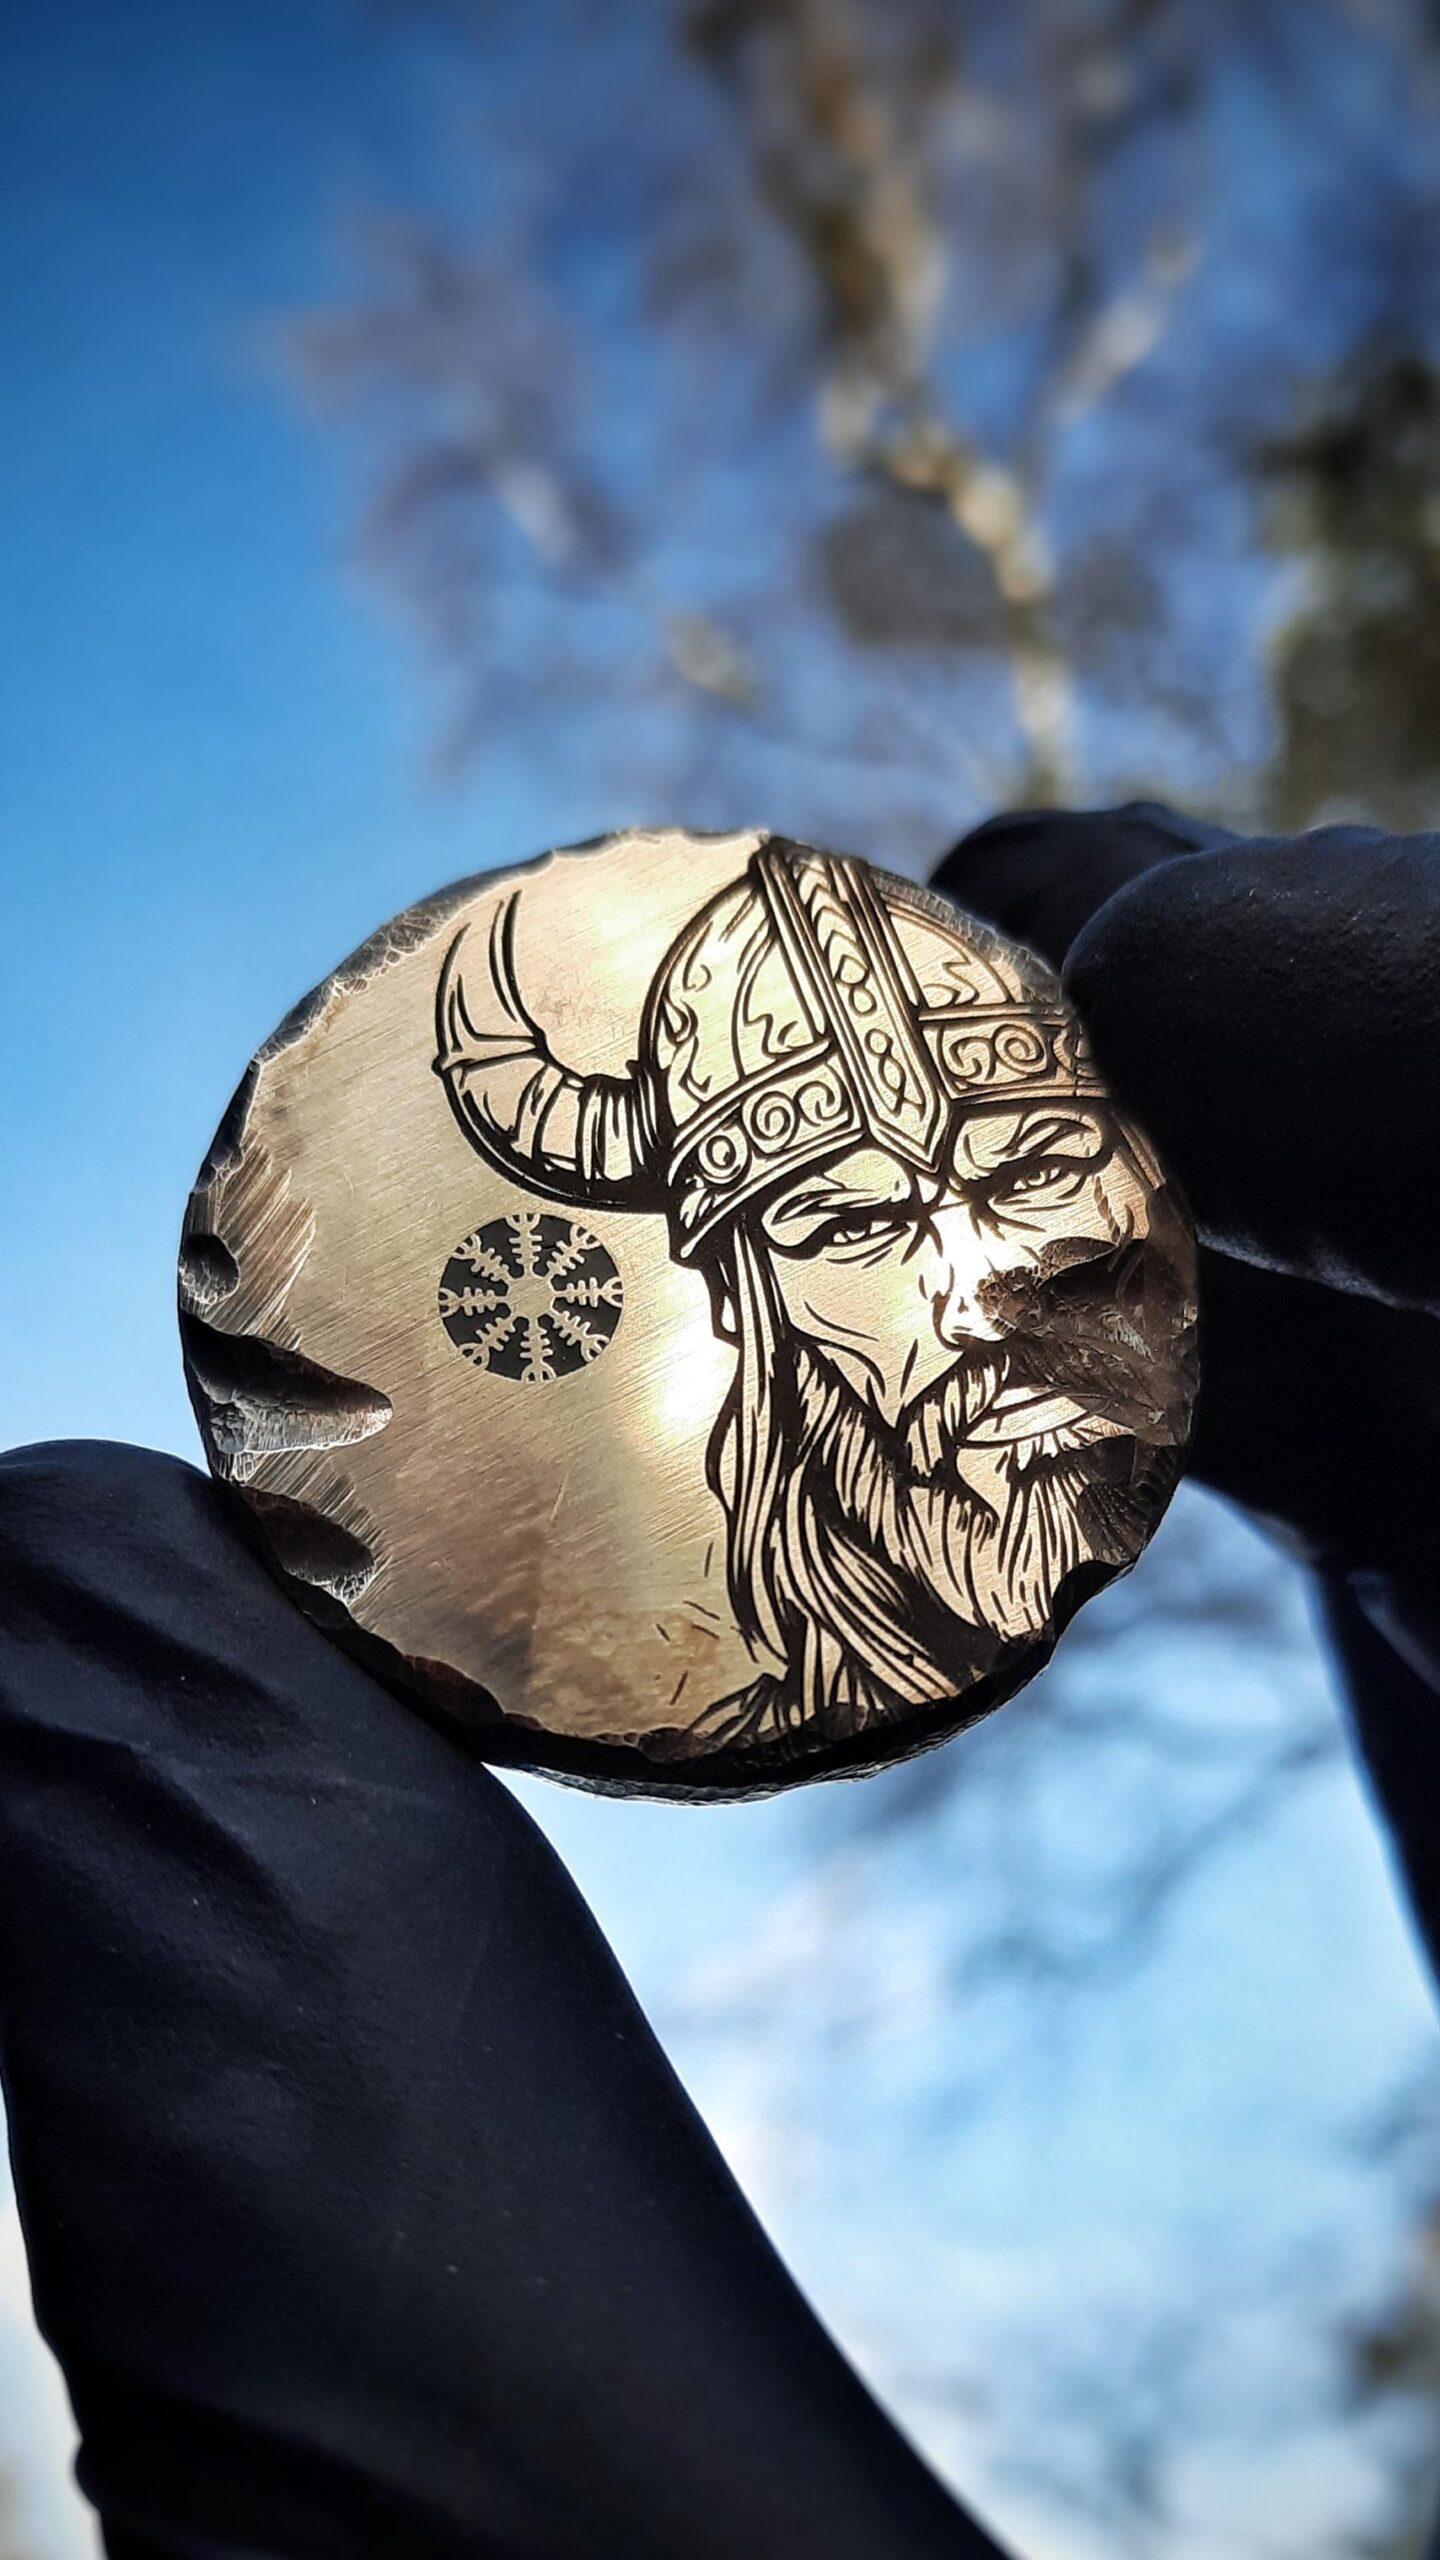 Made this Viking inspired token in brass, with warrior quote “To the dwell of days we fight”